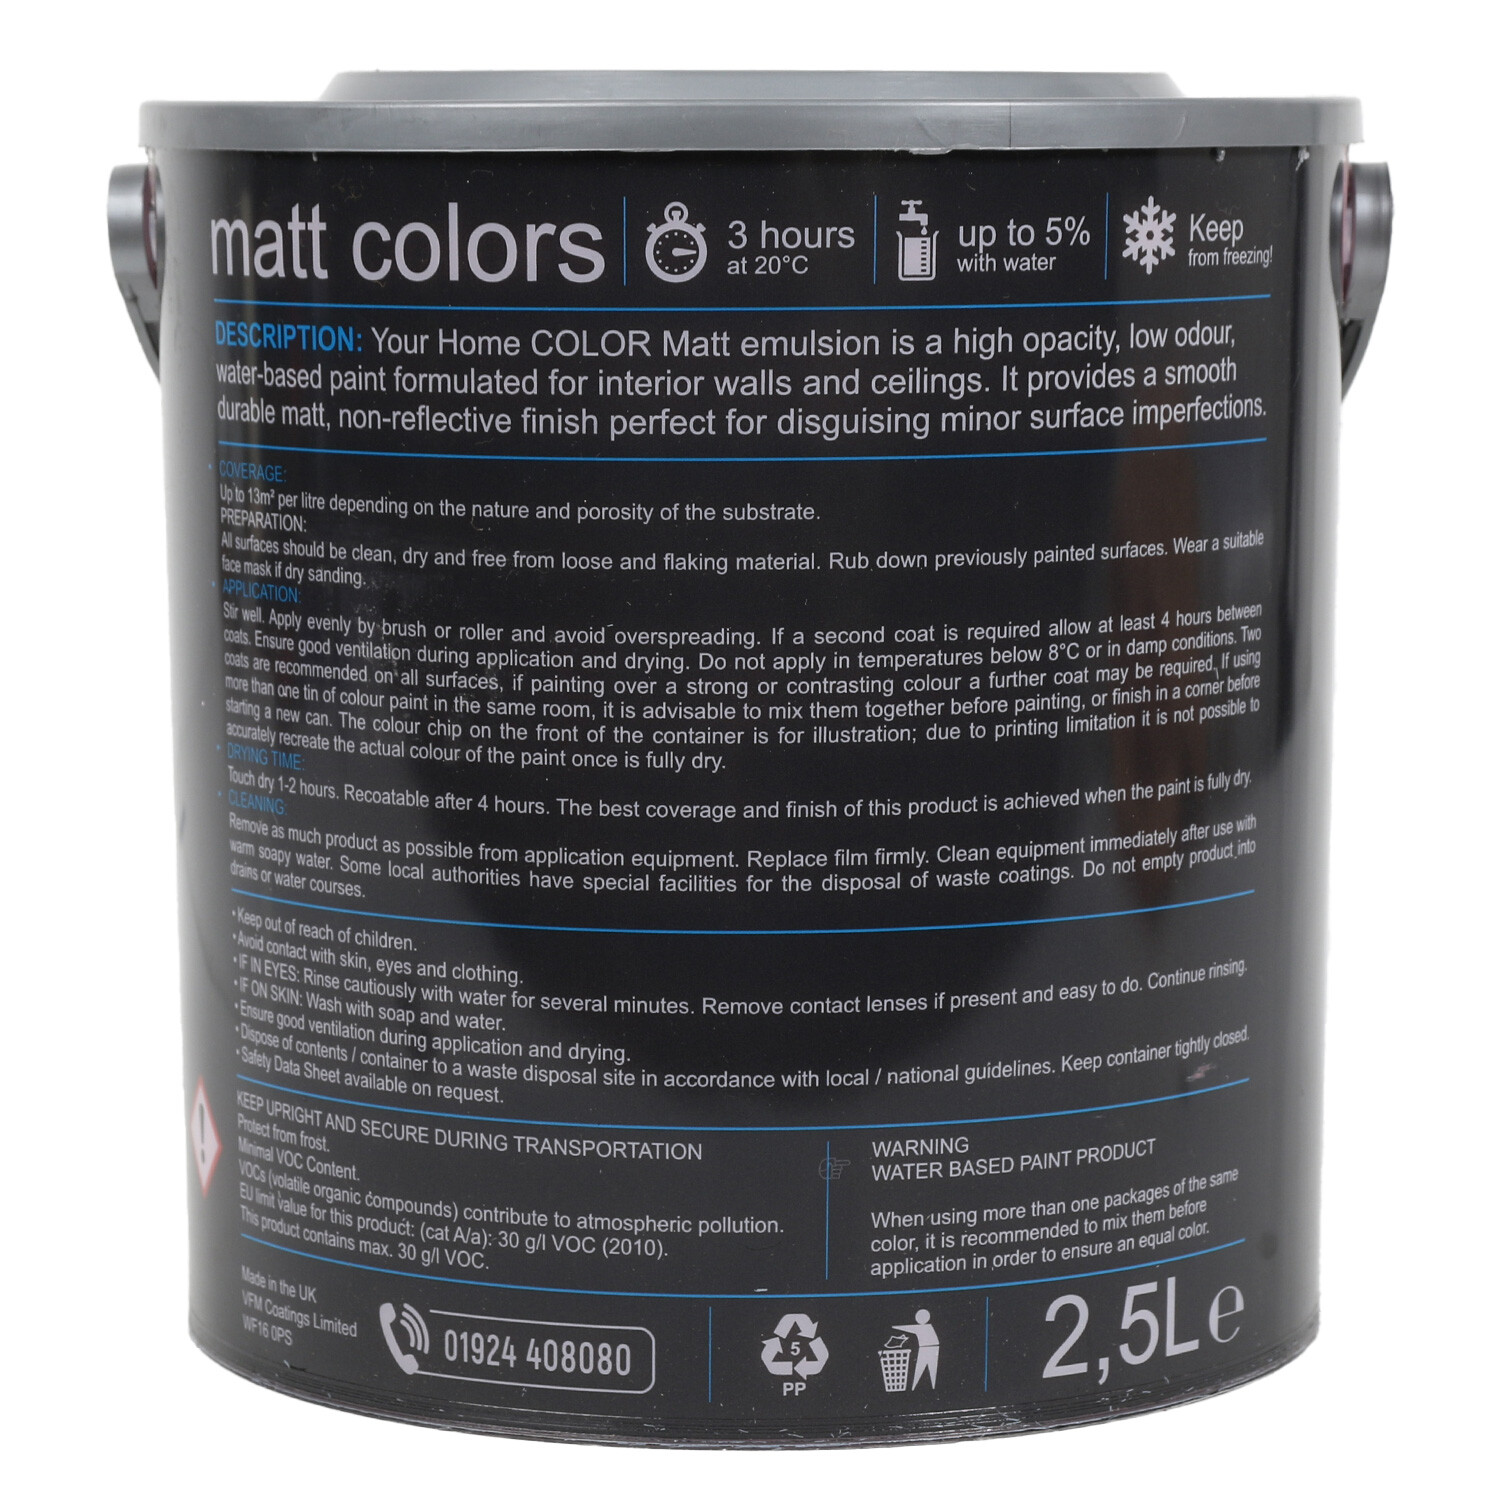 Your Home Walls and Ceilings Pretty Pink Matt Emulsion Paint 2.5L Image 2